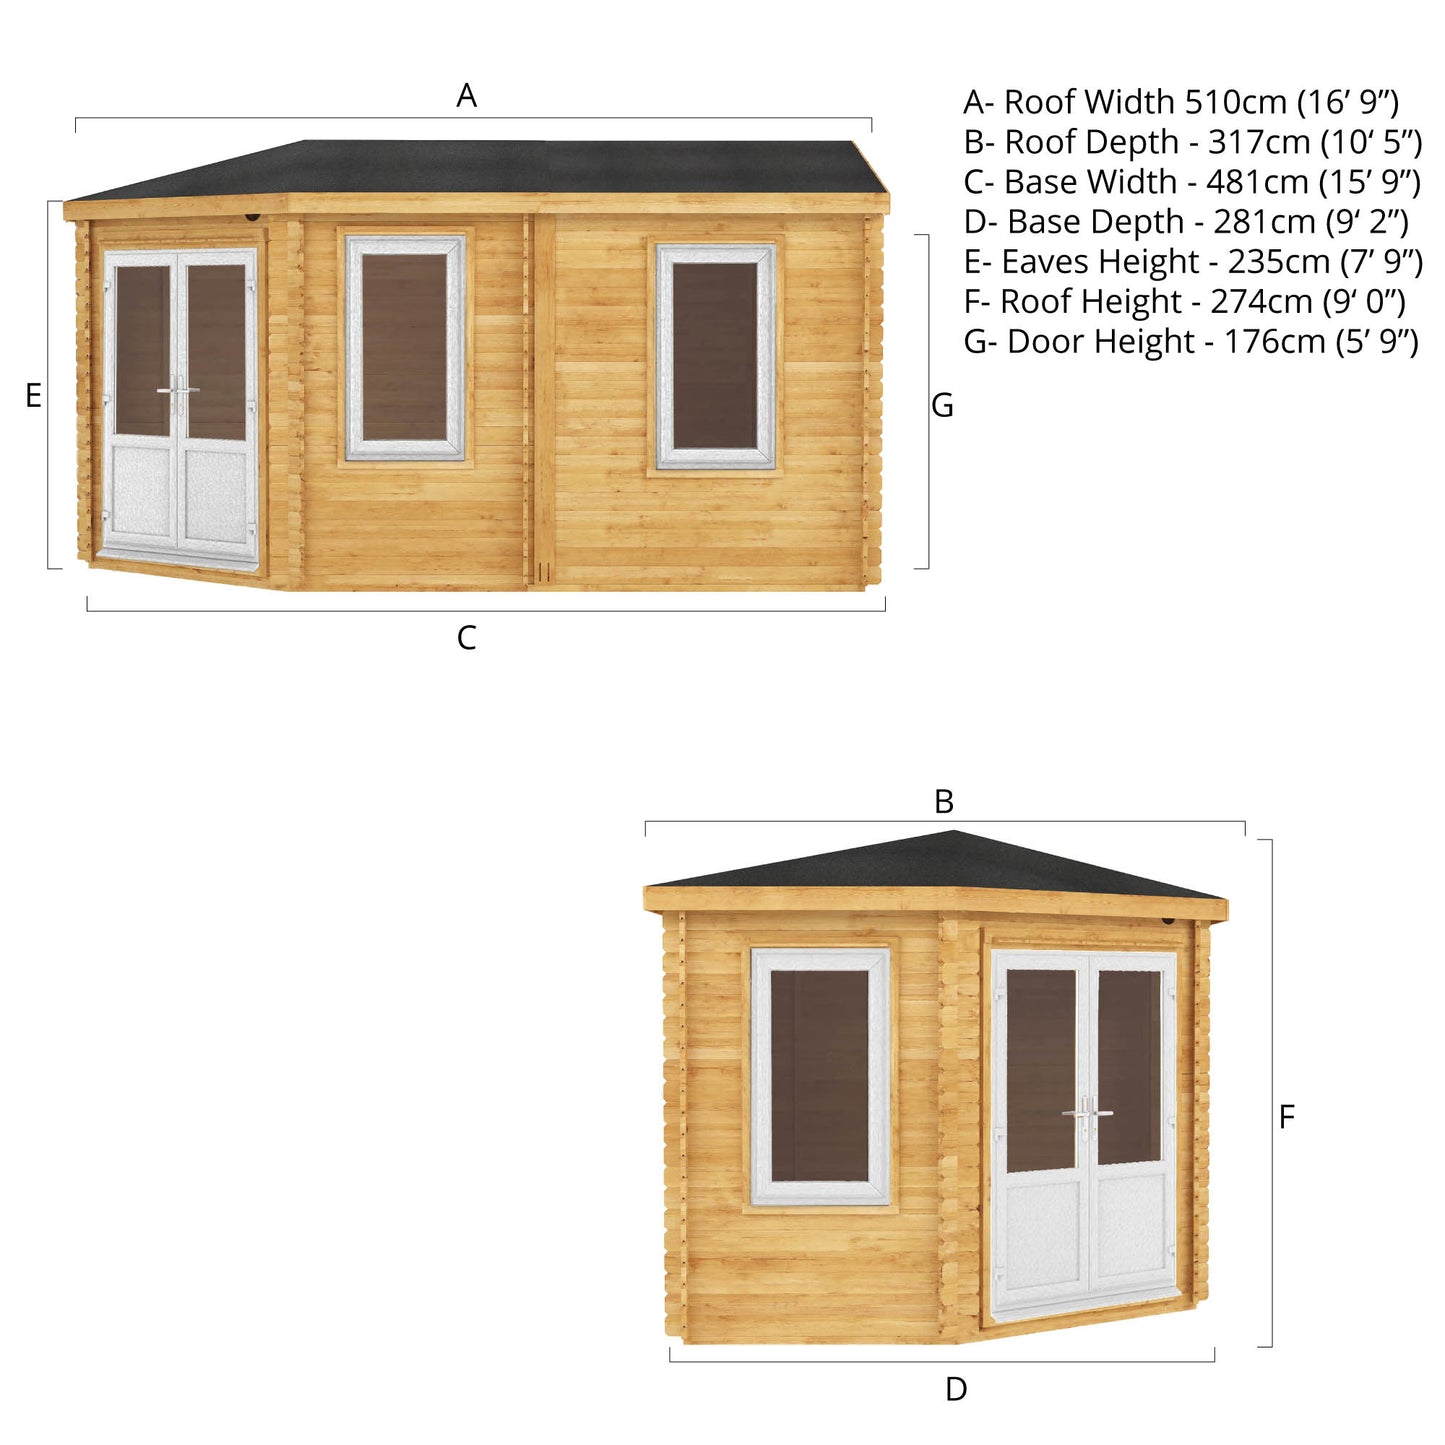 The Goldcrest 5m x 3m Log Cabin with White UPVC